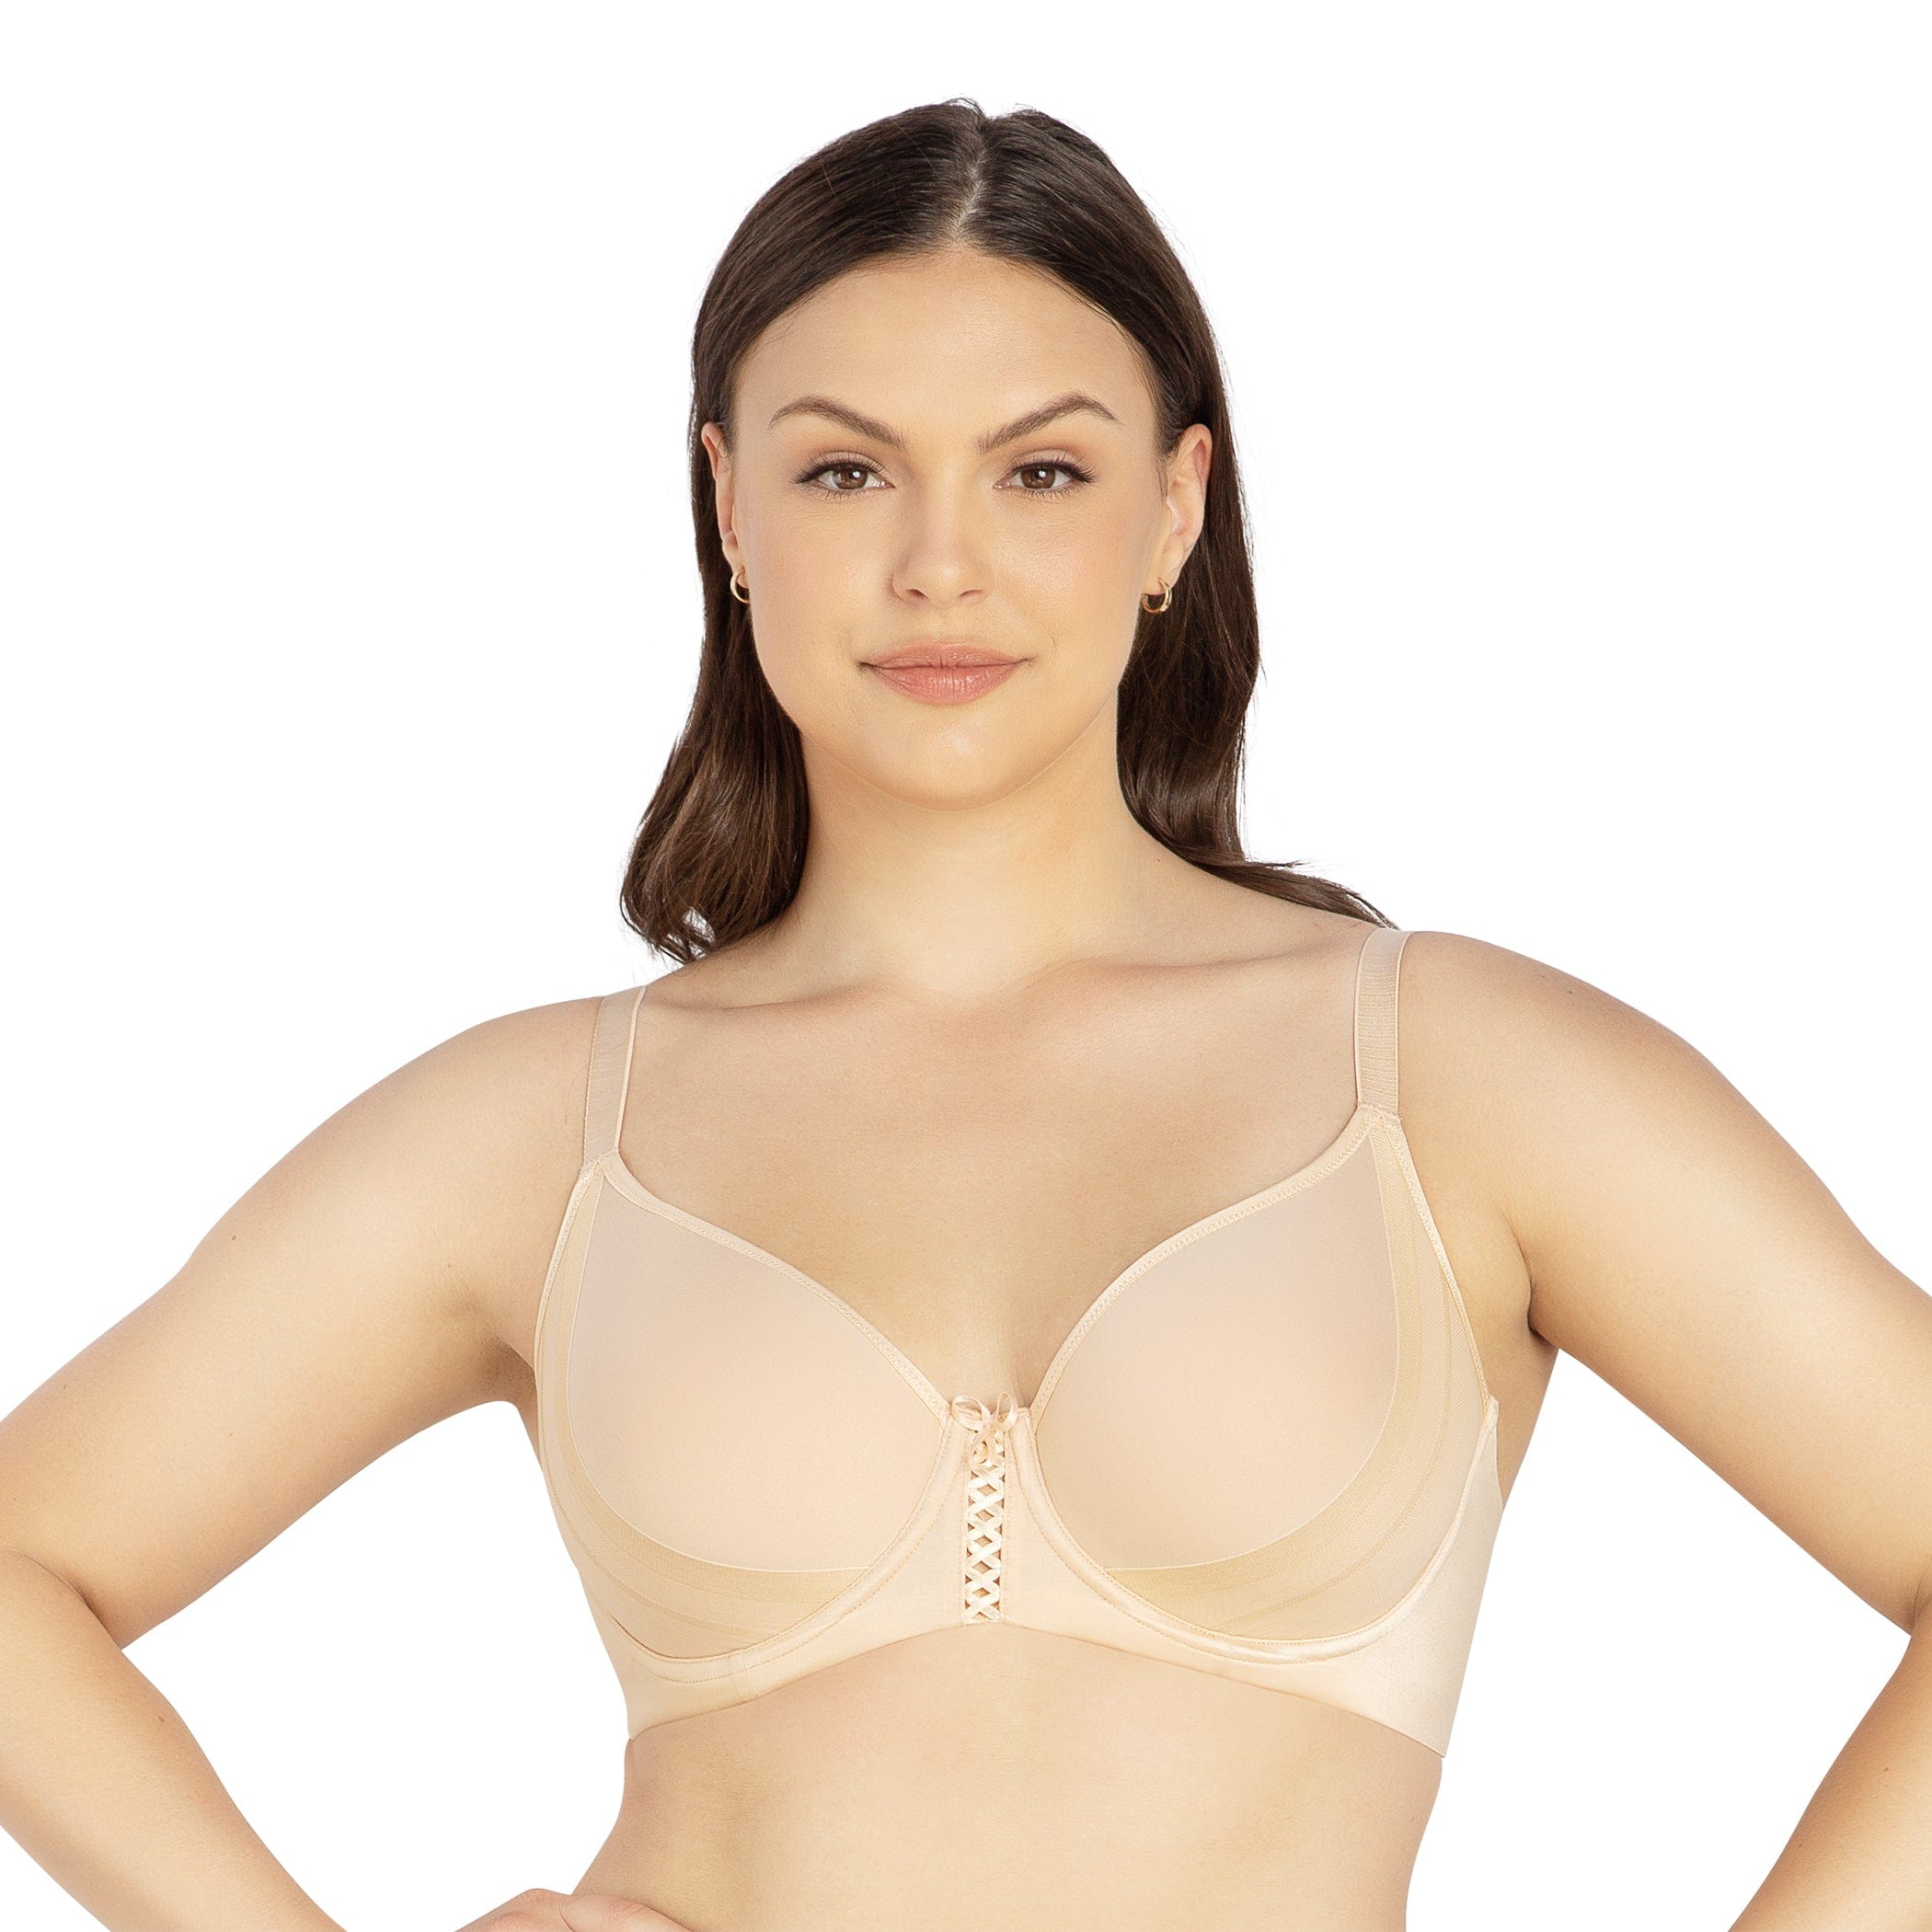 Back Smoothing Bras 30DDD, Bras for Large Breasts